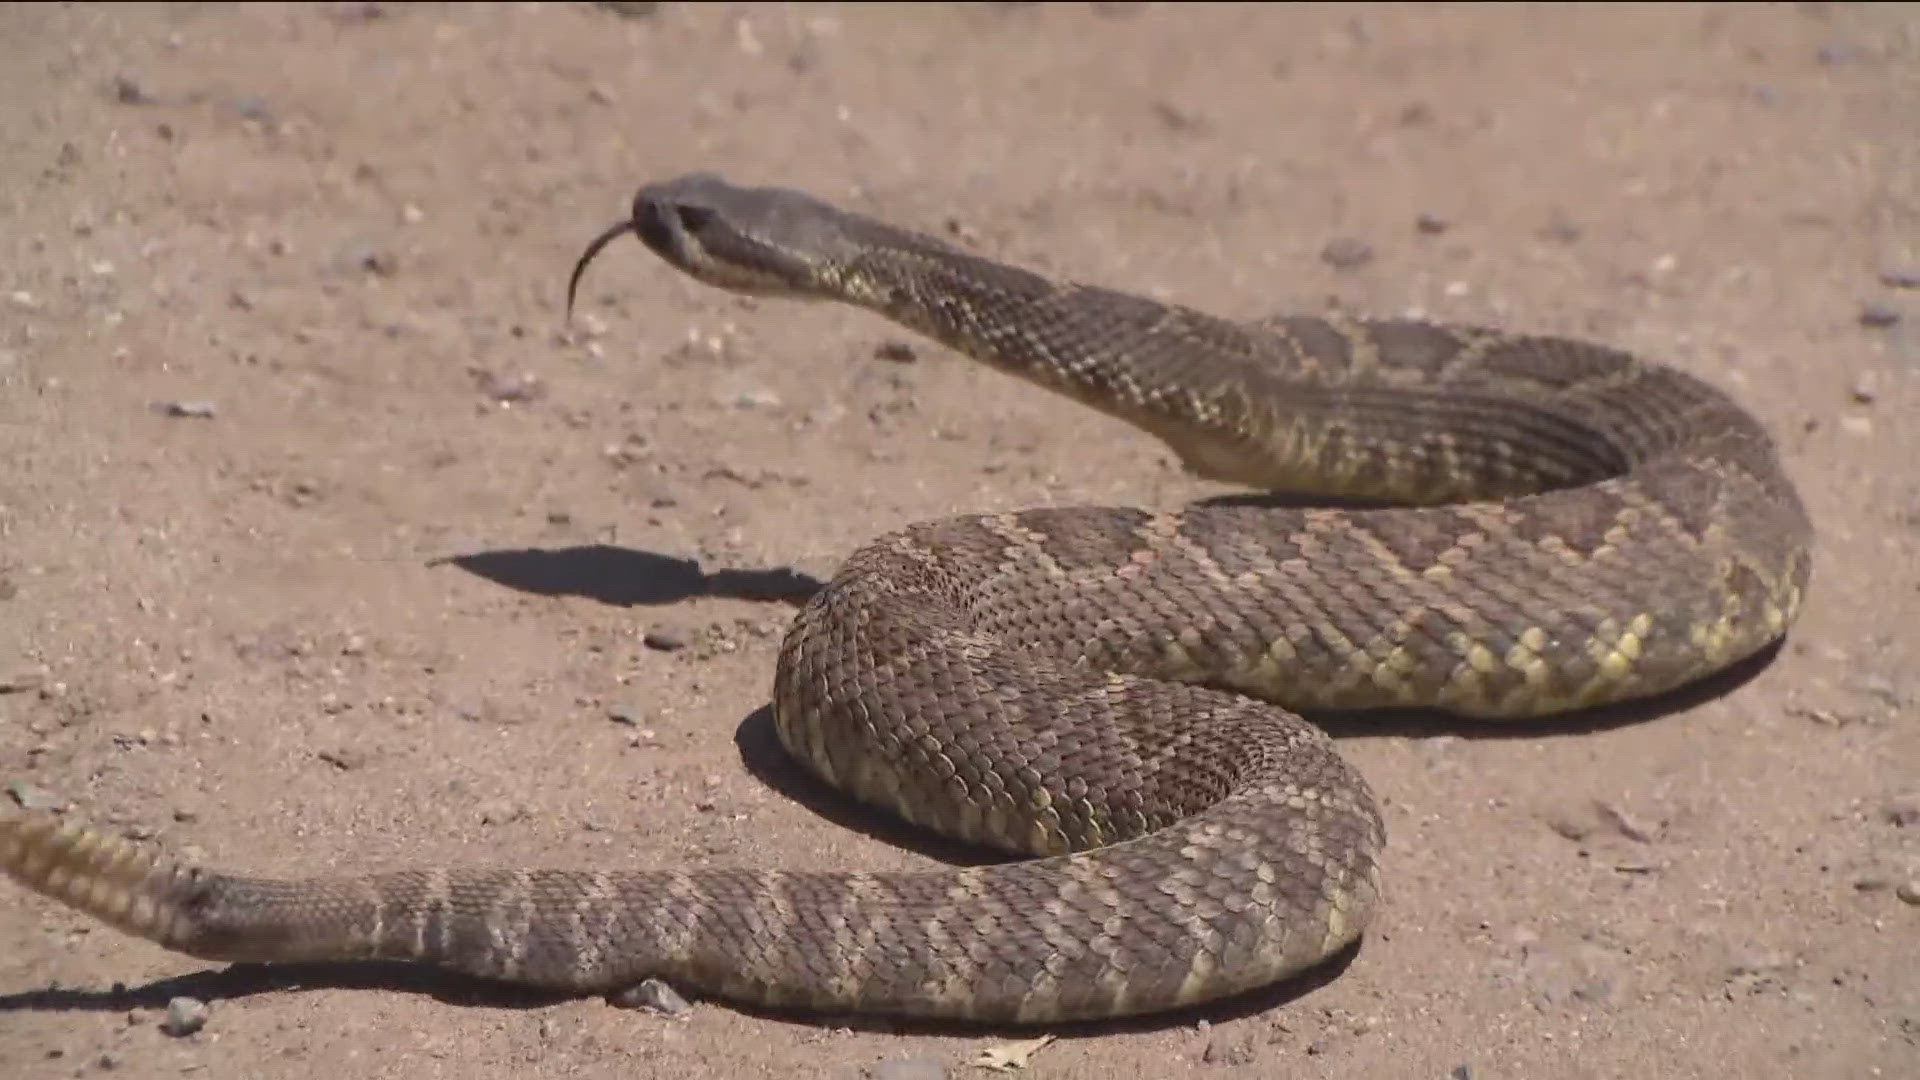 CBS 8 followed alongside a rattlesnake wrangler as he made a house call in Alpine after three snakes were spotted.